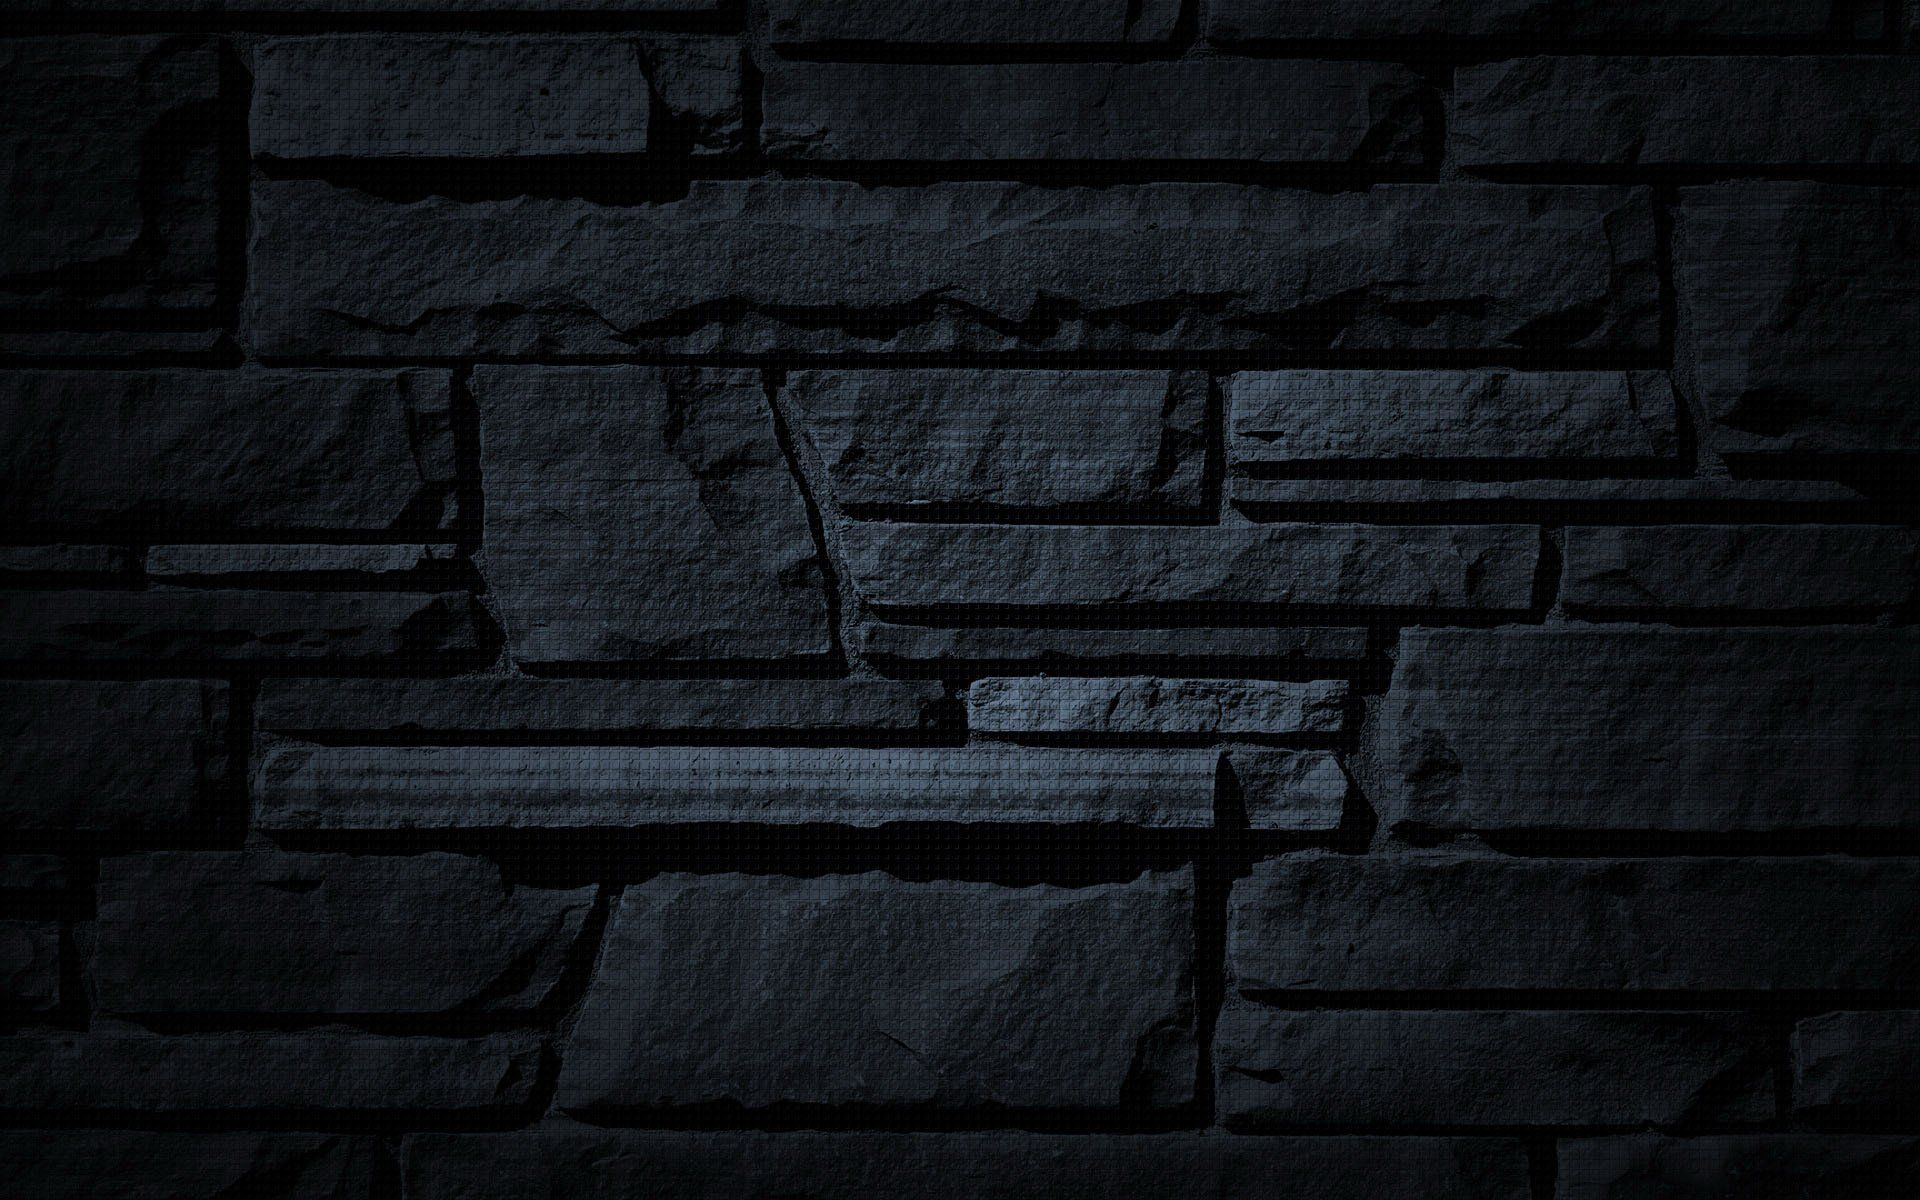 50 black wallpaper in fhd for free download for android desktop